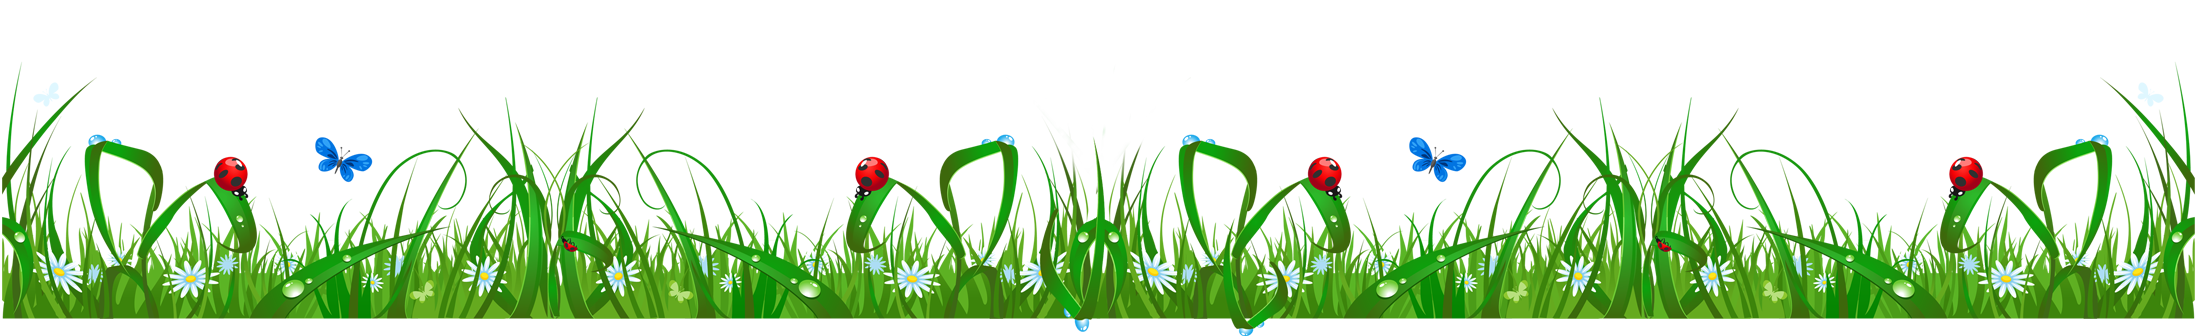 Grass with Flowers and Ladybugs PNG Clipart